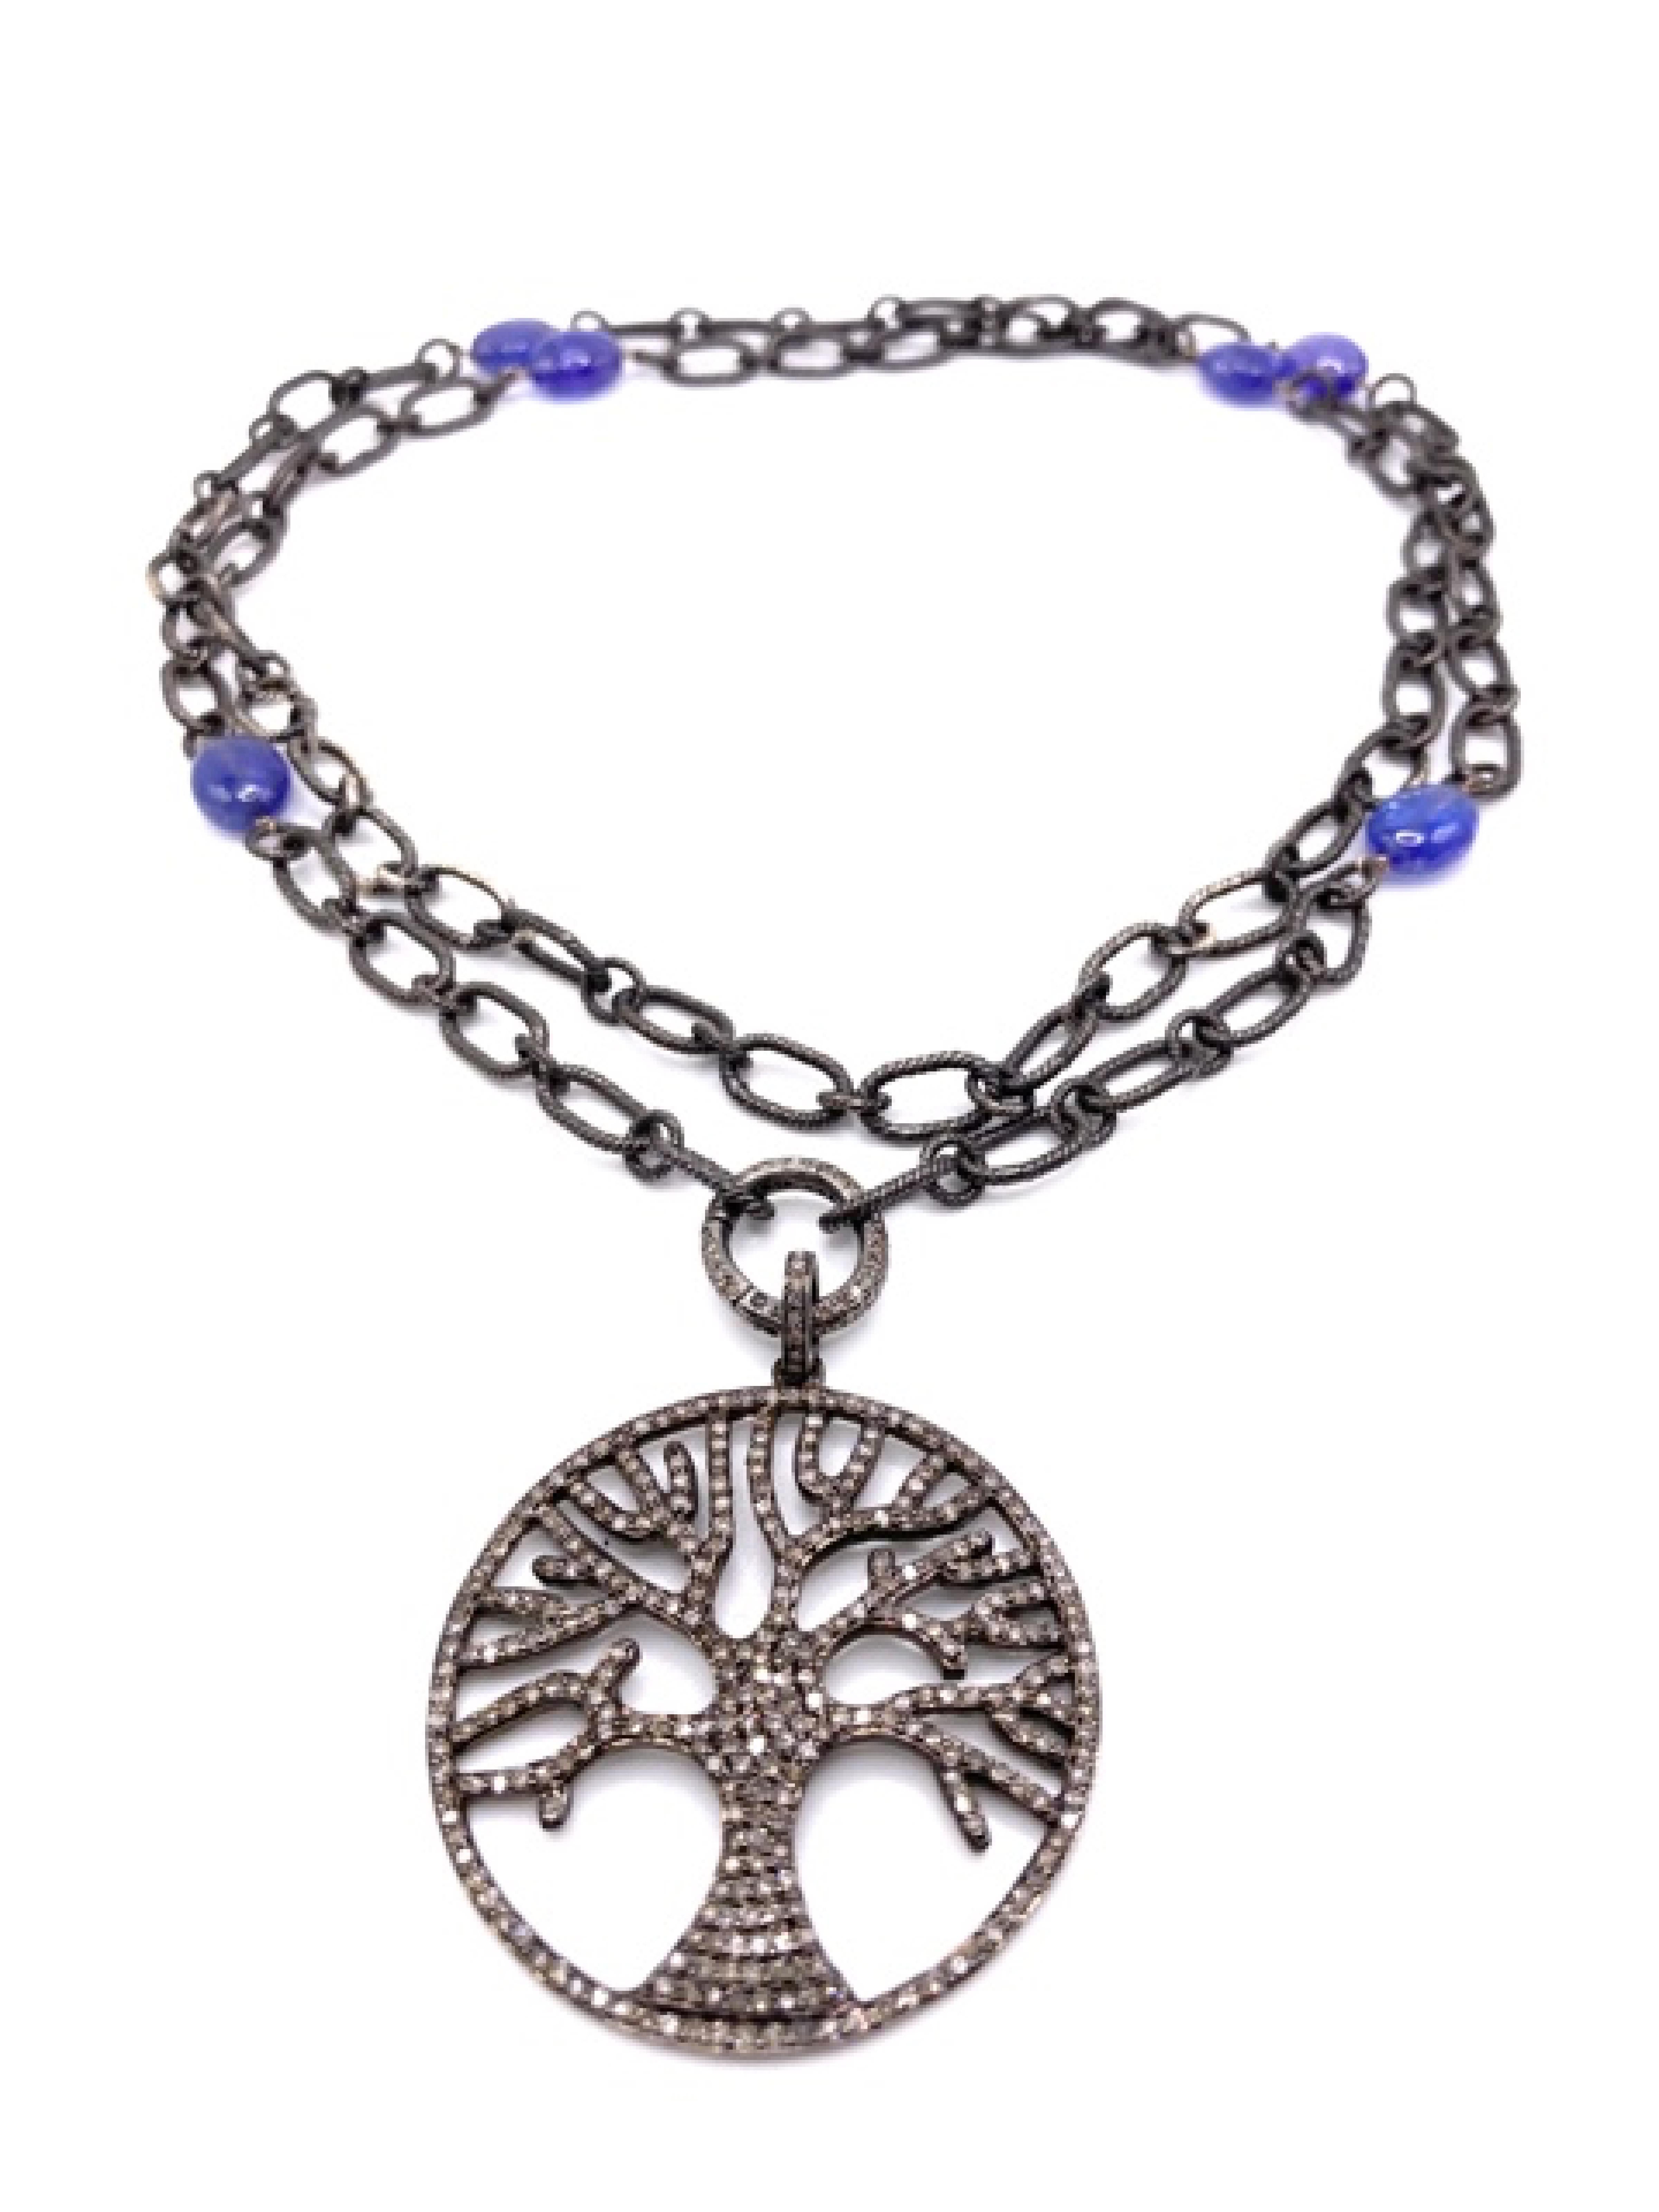 This long Necklace is made of vintage silver with Tanzanite beads and can be worn doubled with a front clasp. The Tree Of Life pendant has 2 Carat of black brilliant cut Diamonds.